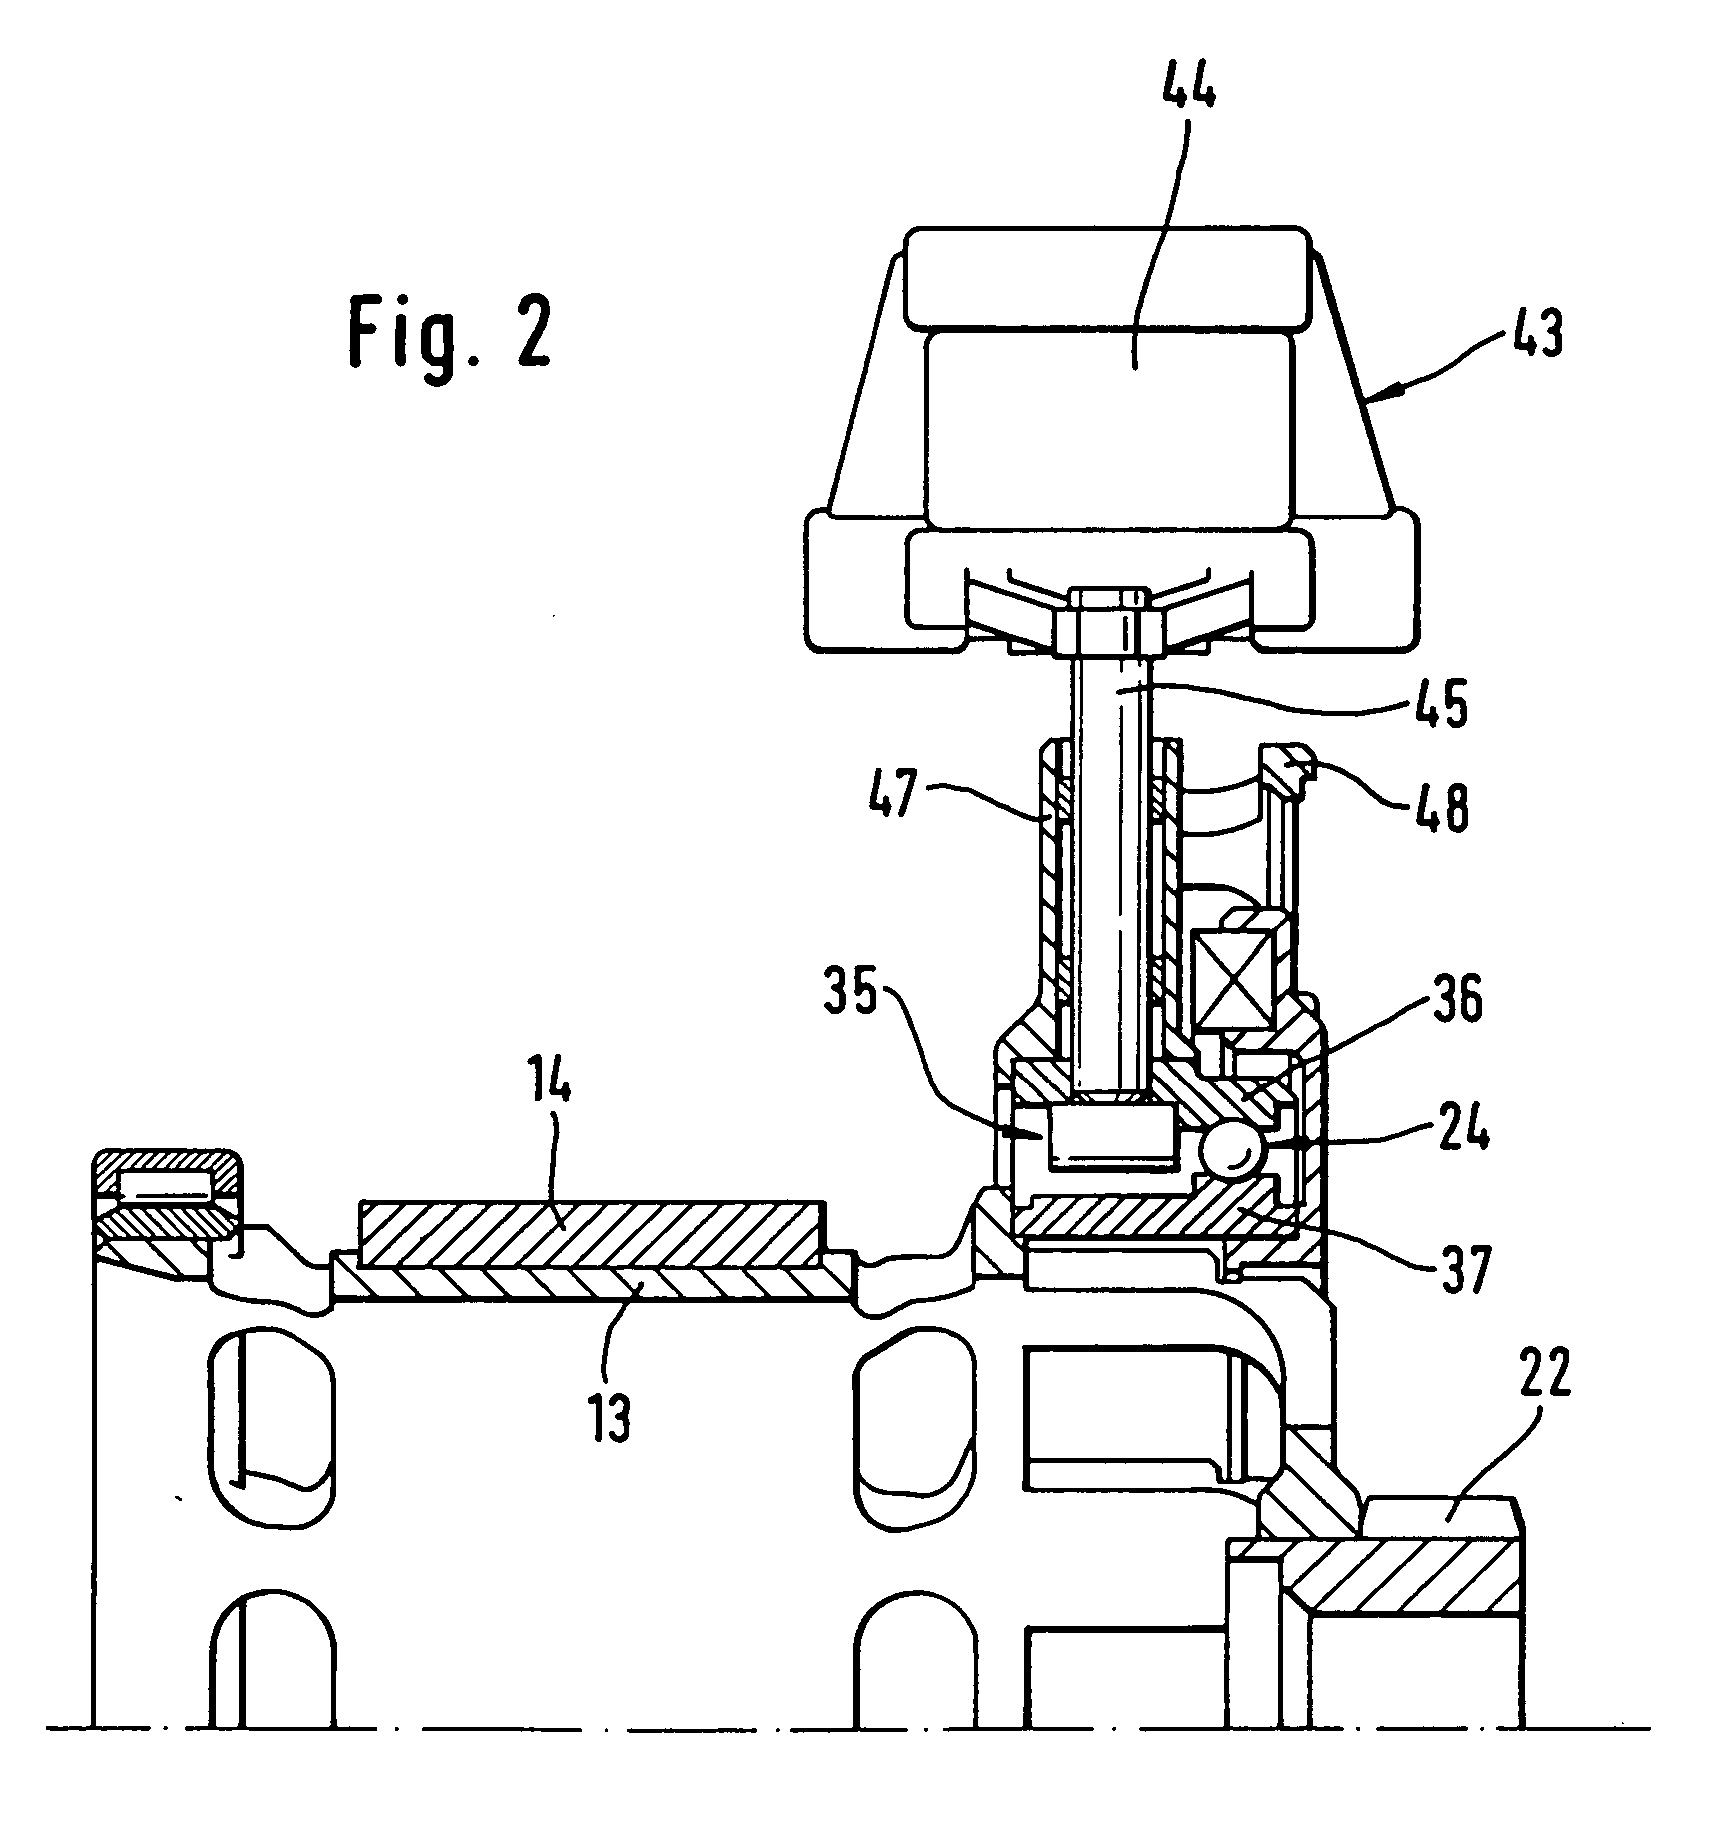 Method for actuating an electromechanical parking brake device